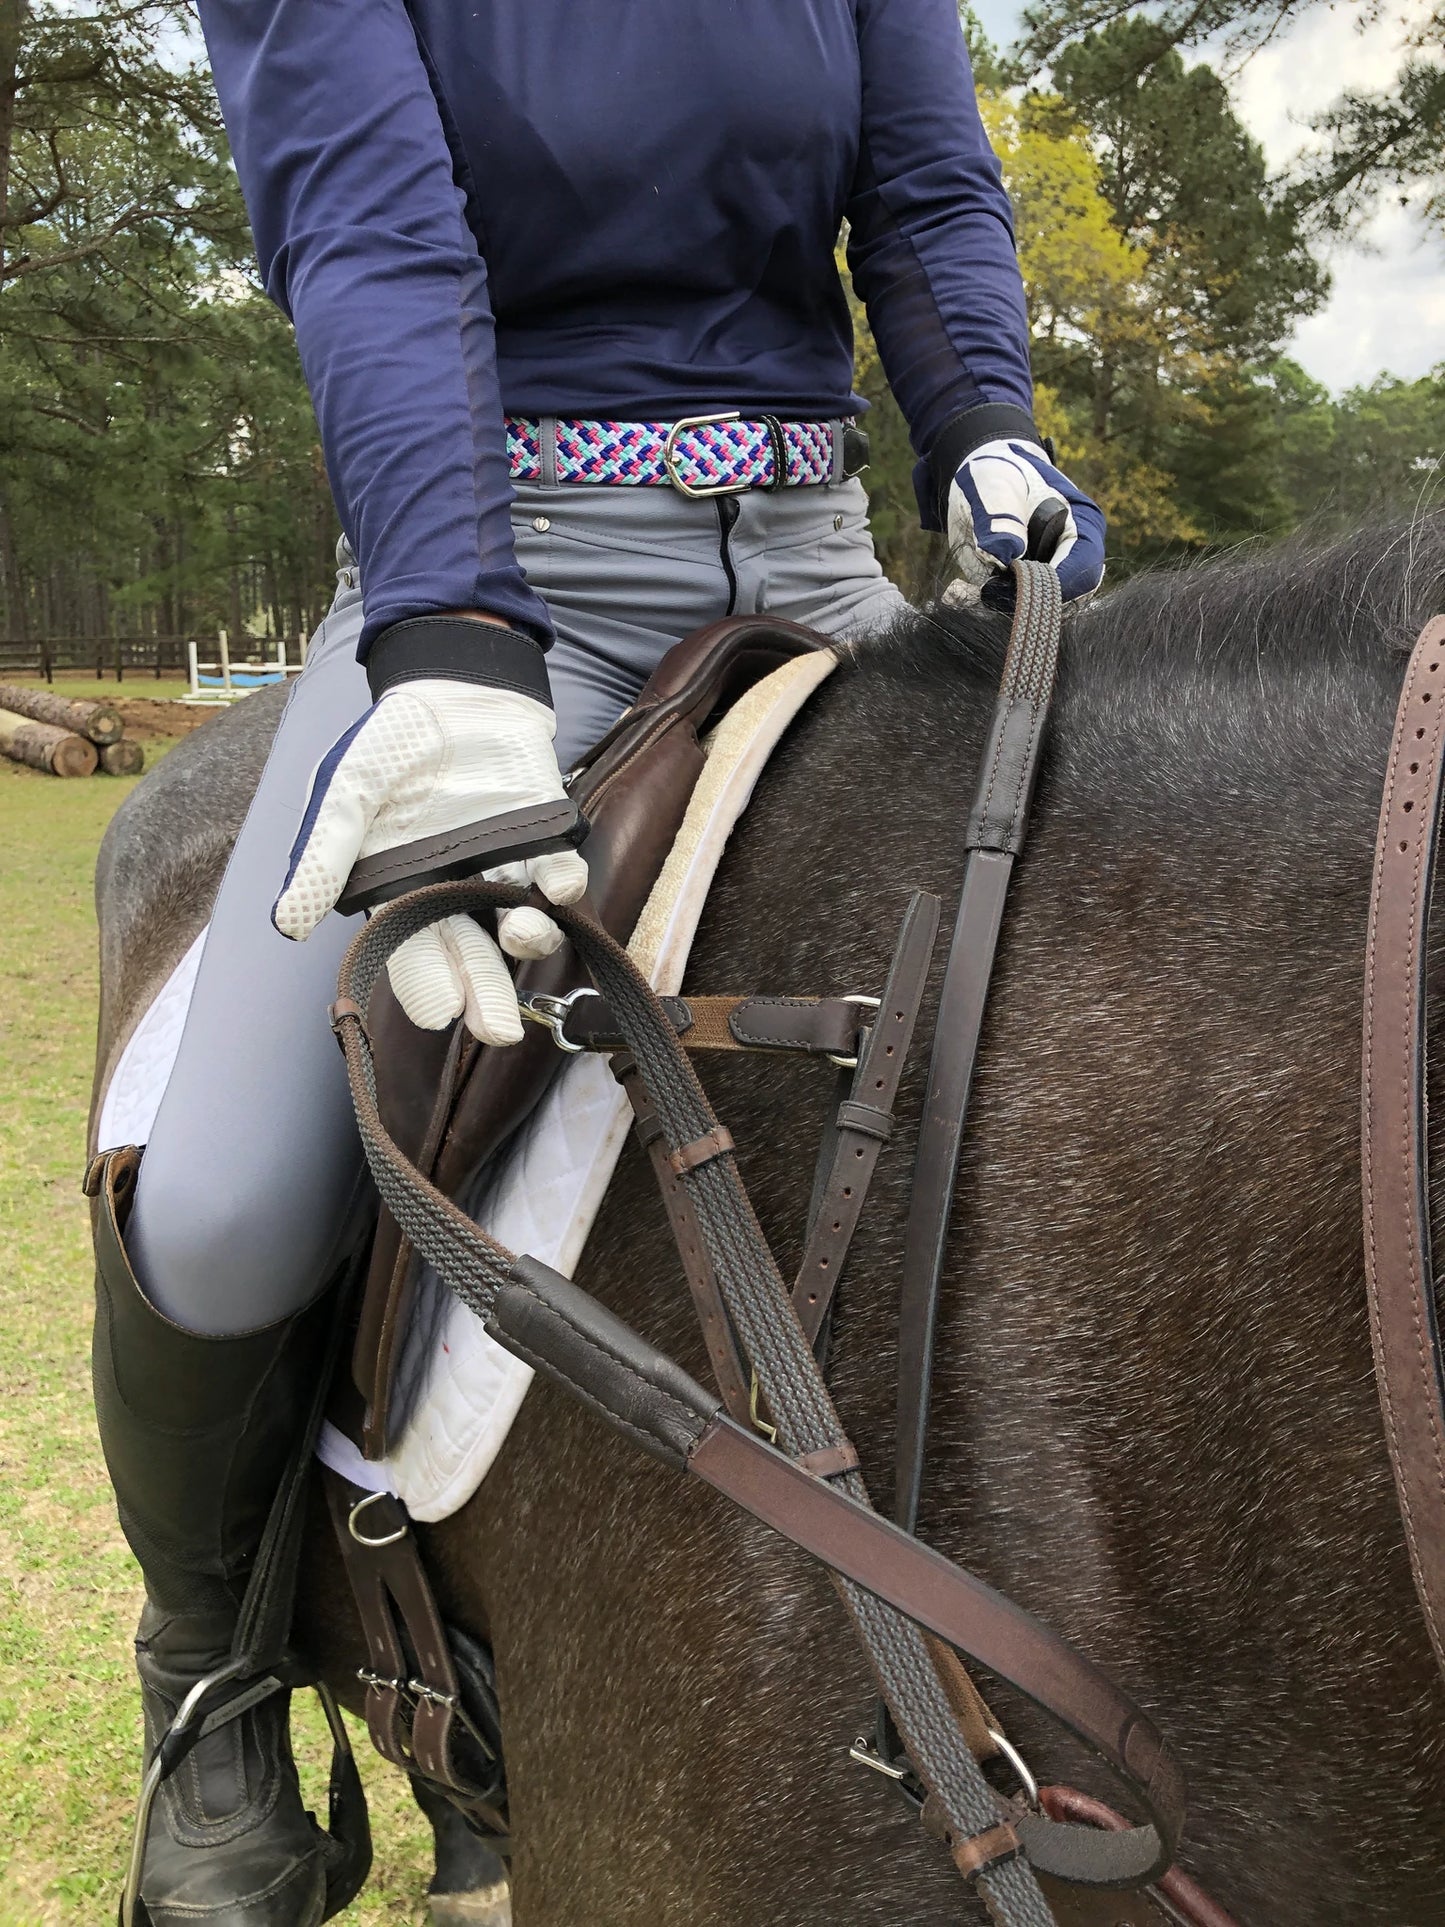 Correct Connect ™ 3-in-1 Training Breastplate